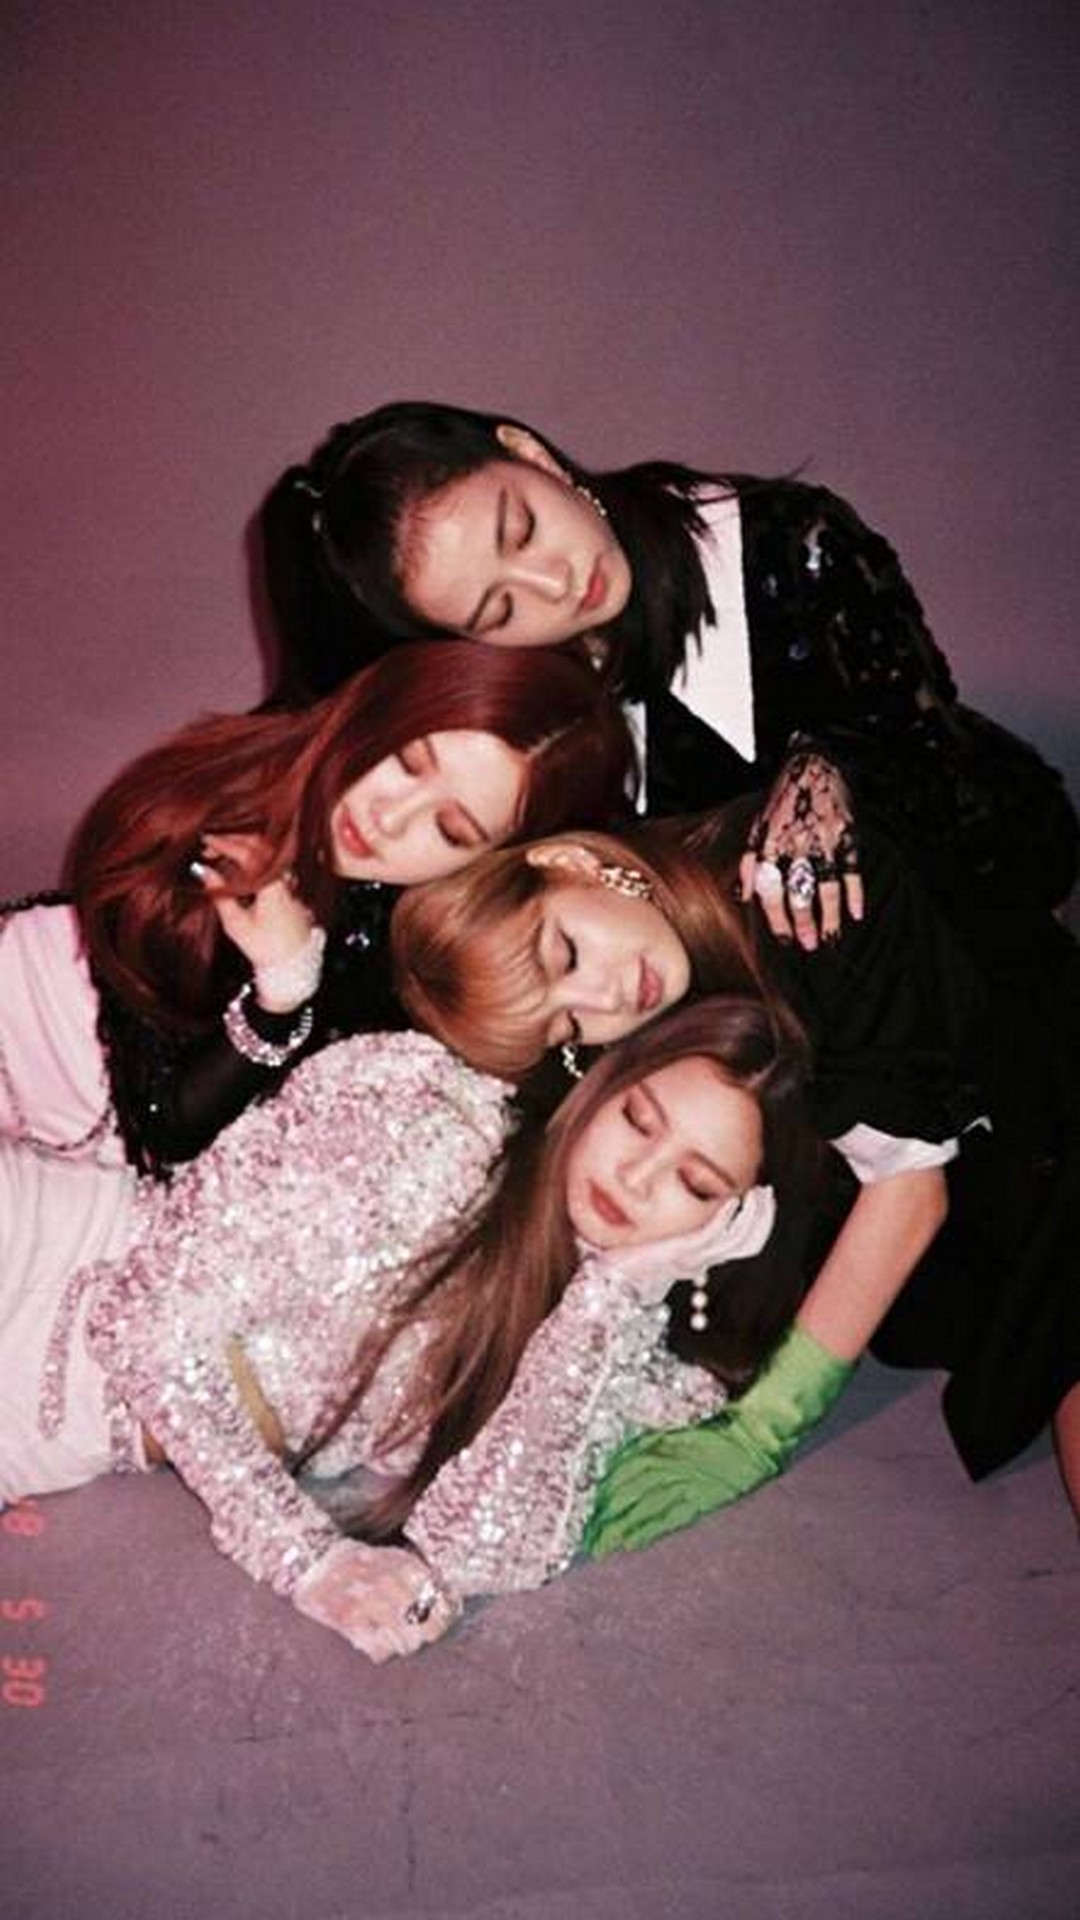 Blackpink iPhone 8 Wallpaper with high-resolution 1080x1920 pixel. You can use this wallpaper for your iPhone 5, 6, 7, 8, X, XS, XR backgrounds, Mobile Screensaver, or iPad Lock Screen